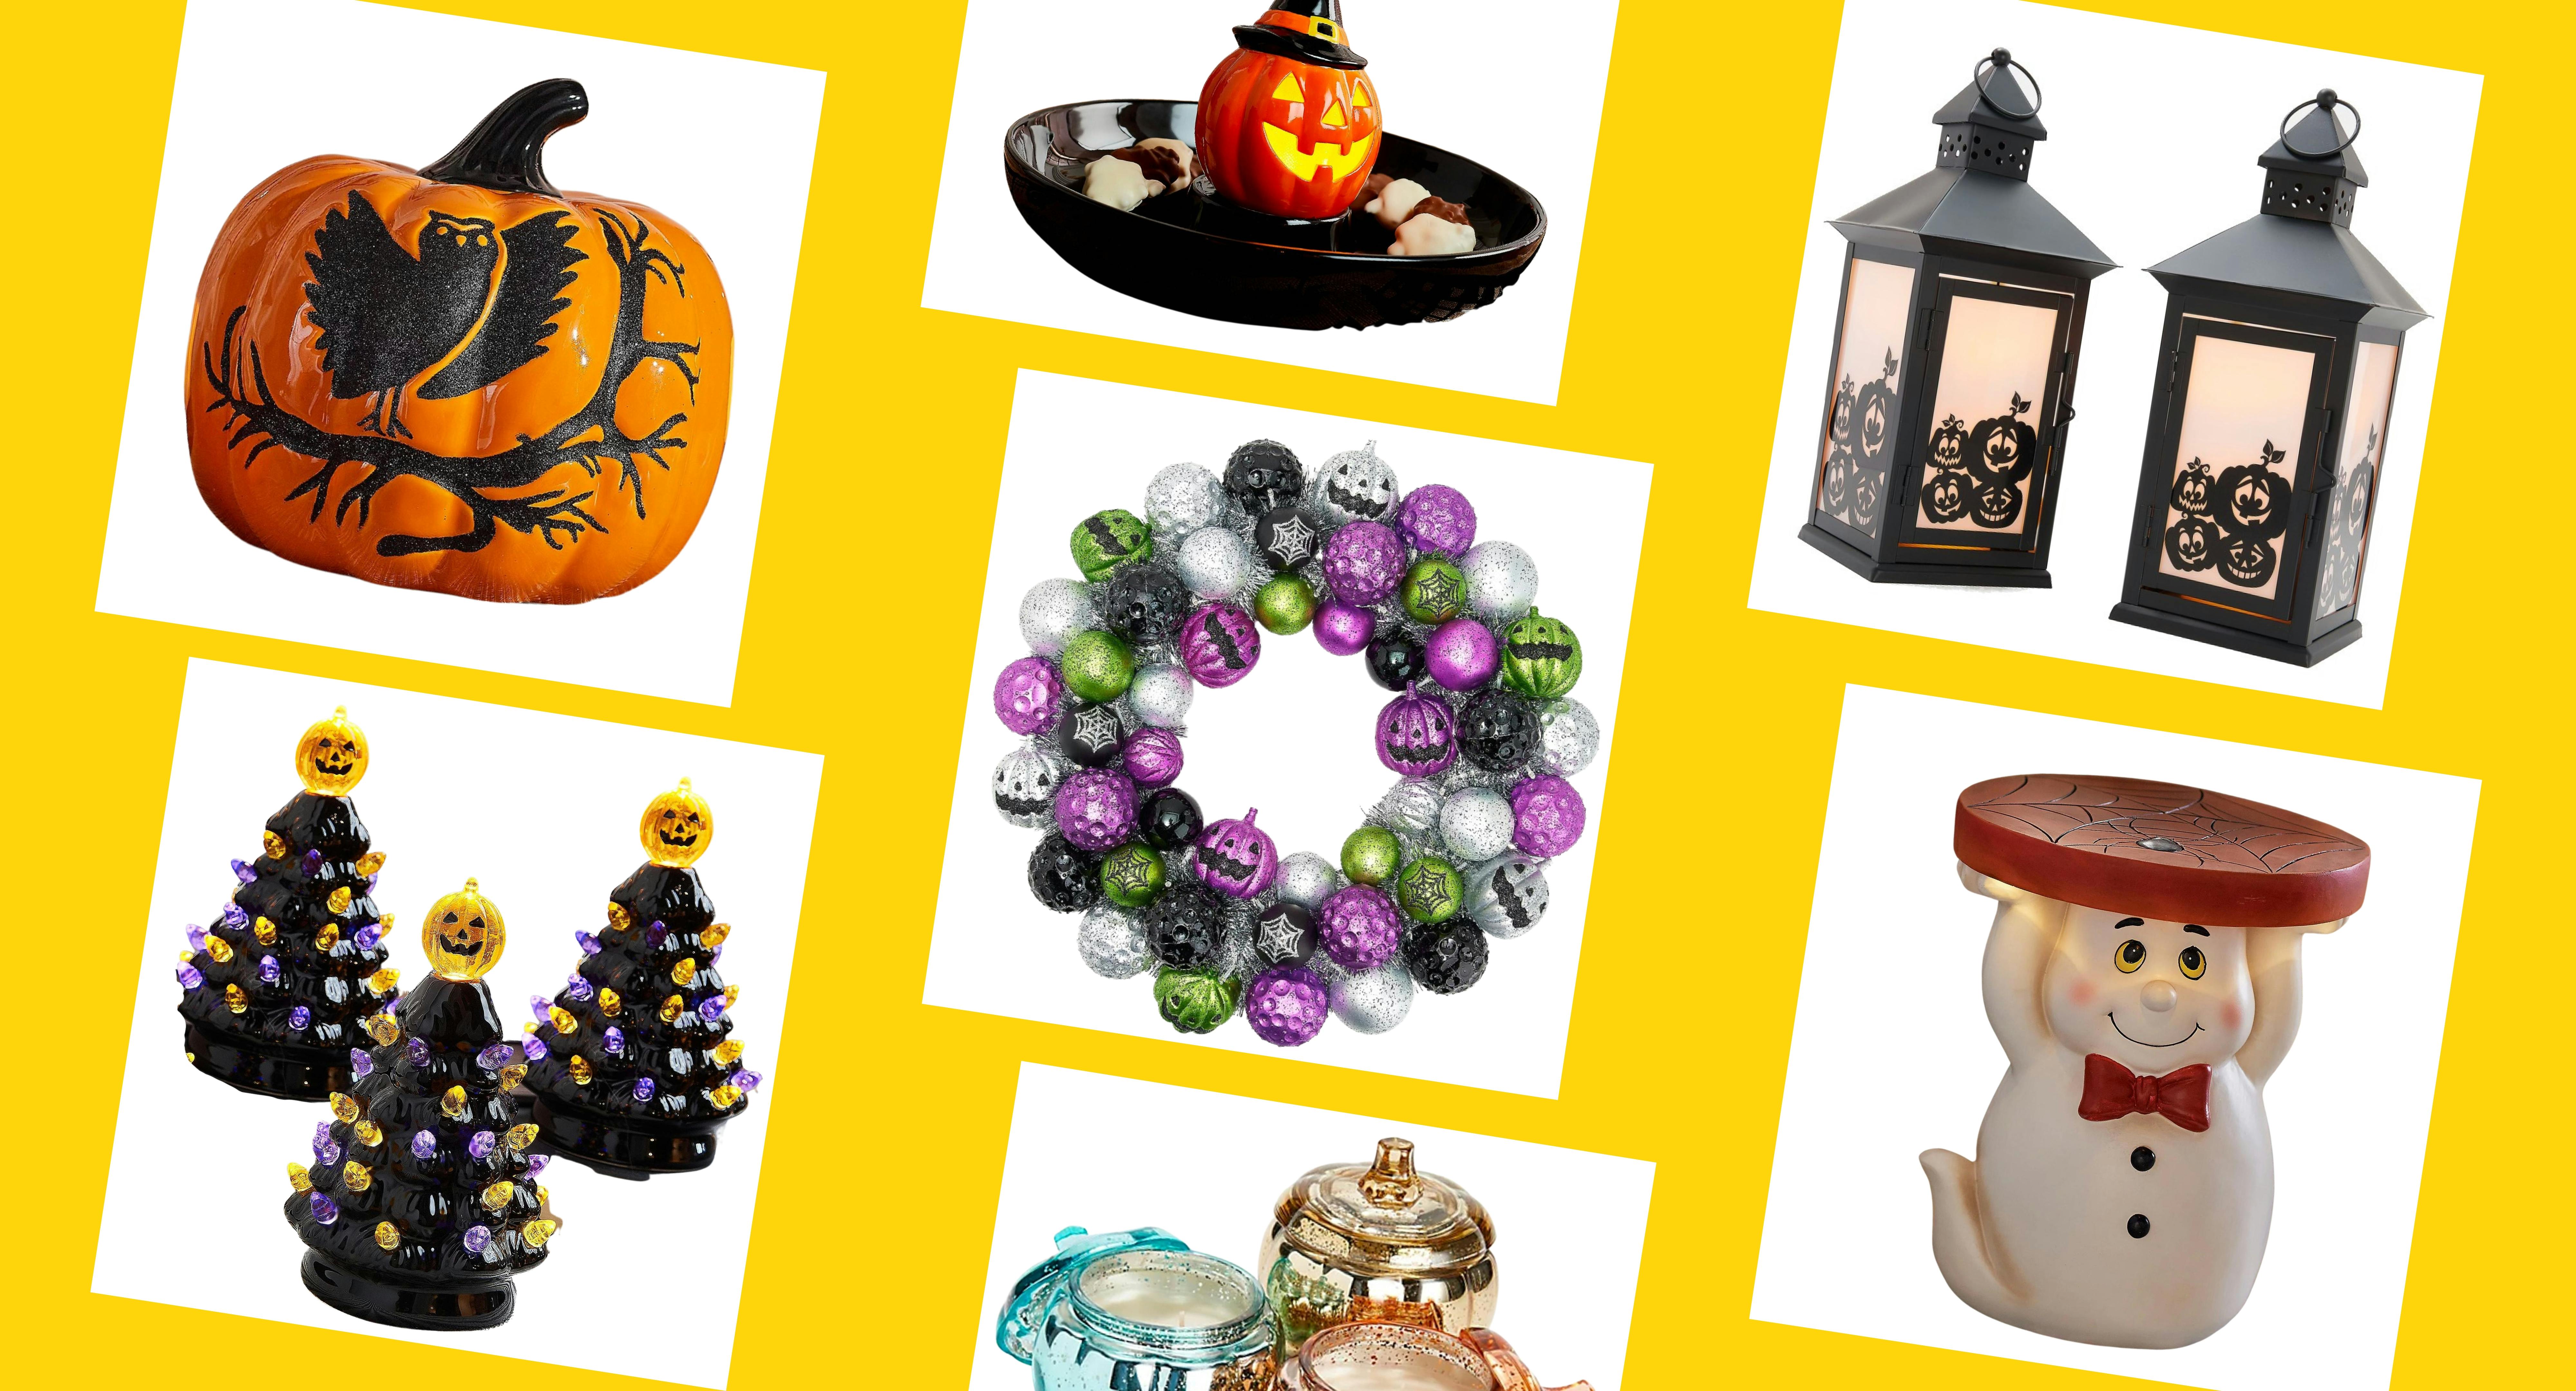 https://content-images.thekrazycouponlady.com/nie44ndm9bqr/3ABGkgDpI0puCklgL6nsh6/05ad1028899bf18691a22e0a49e028ed/qvc-halloween-august-round-up-featured-pic-1-1691684995-1691684995.jpg